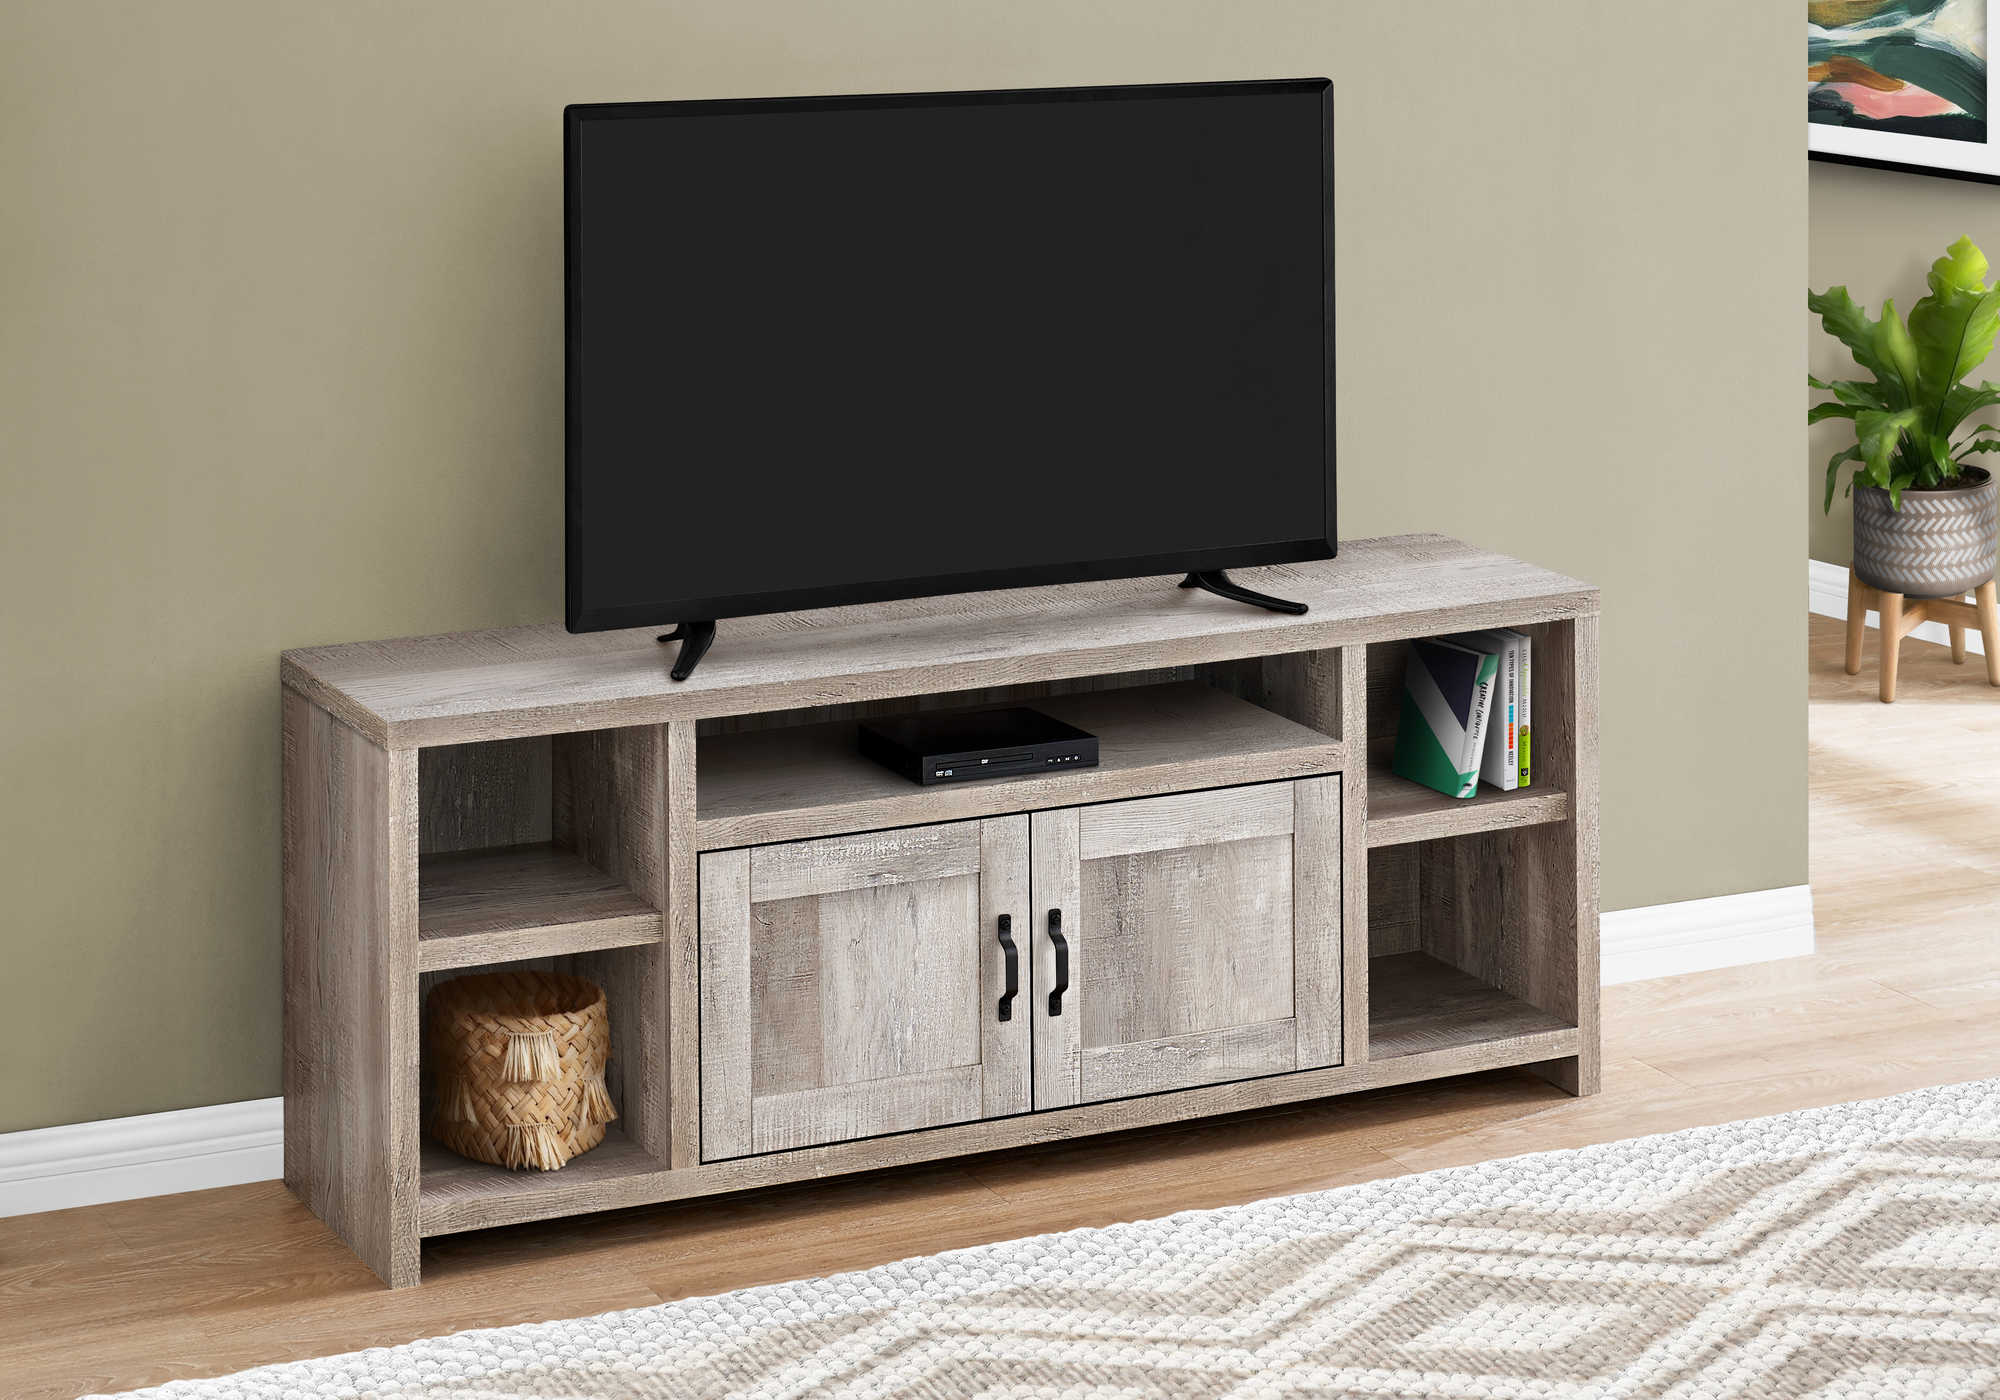 TV STAND - 60"L / TAUPE RECLAIMED WOOD-LOOK 